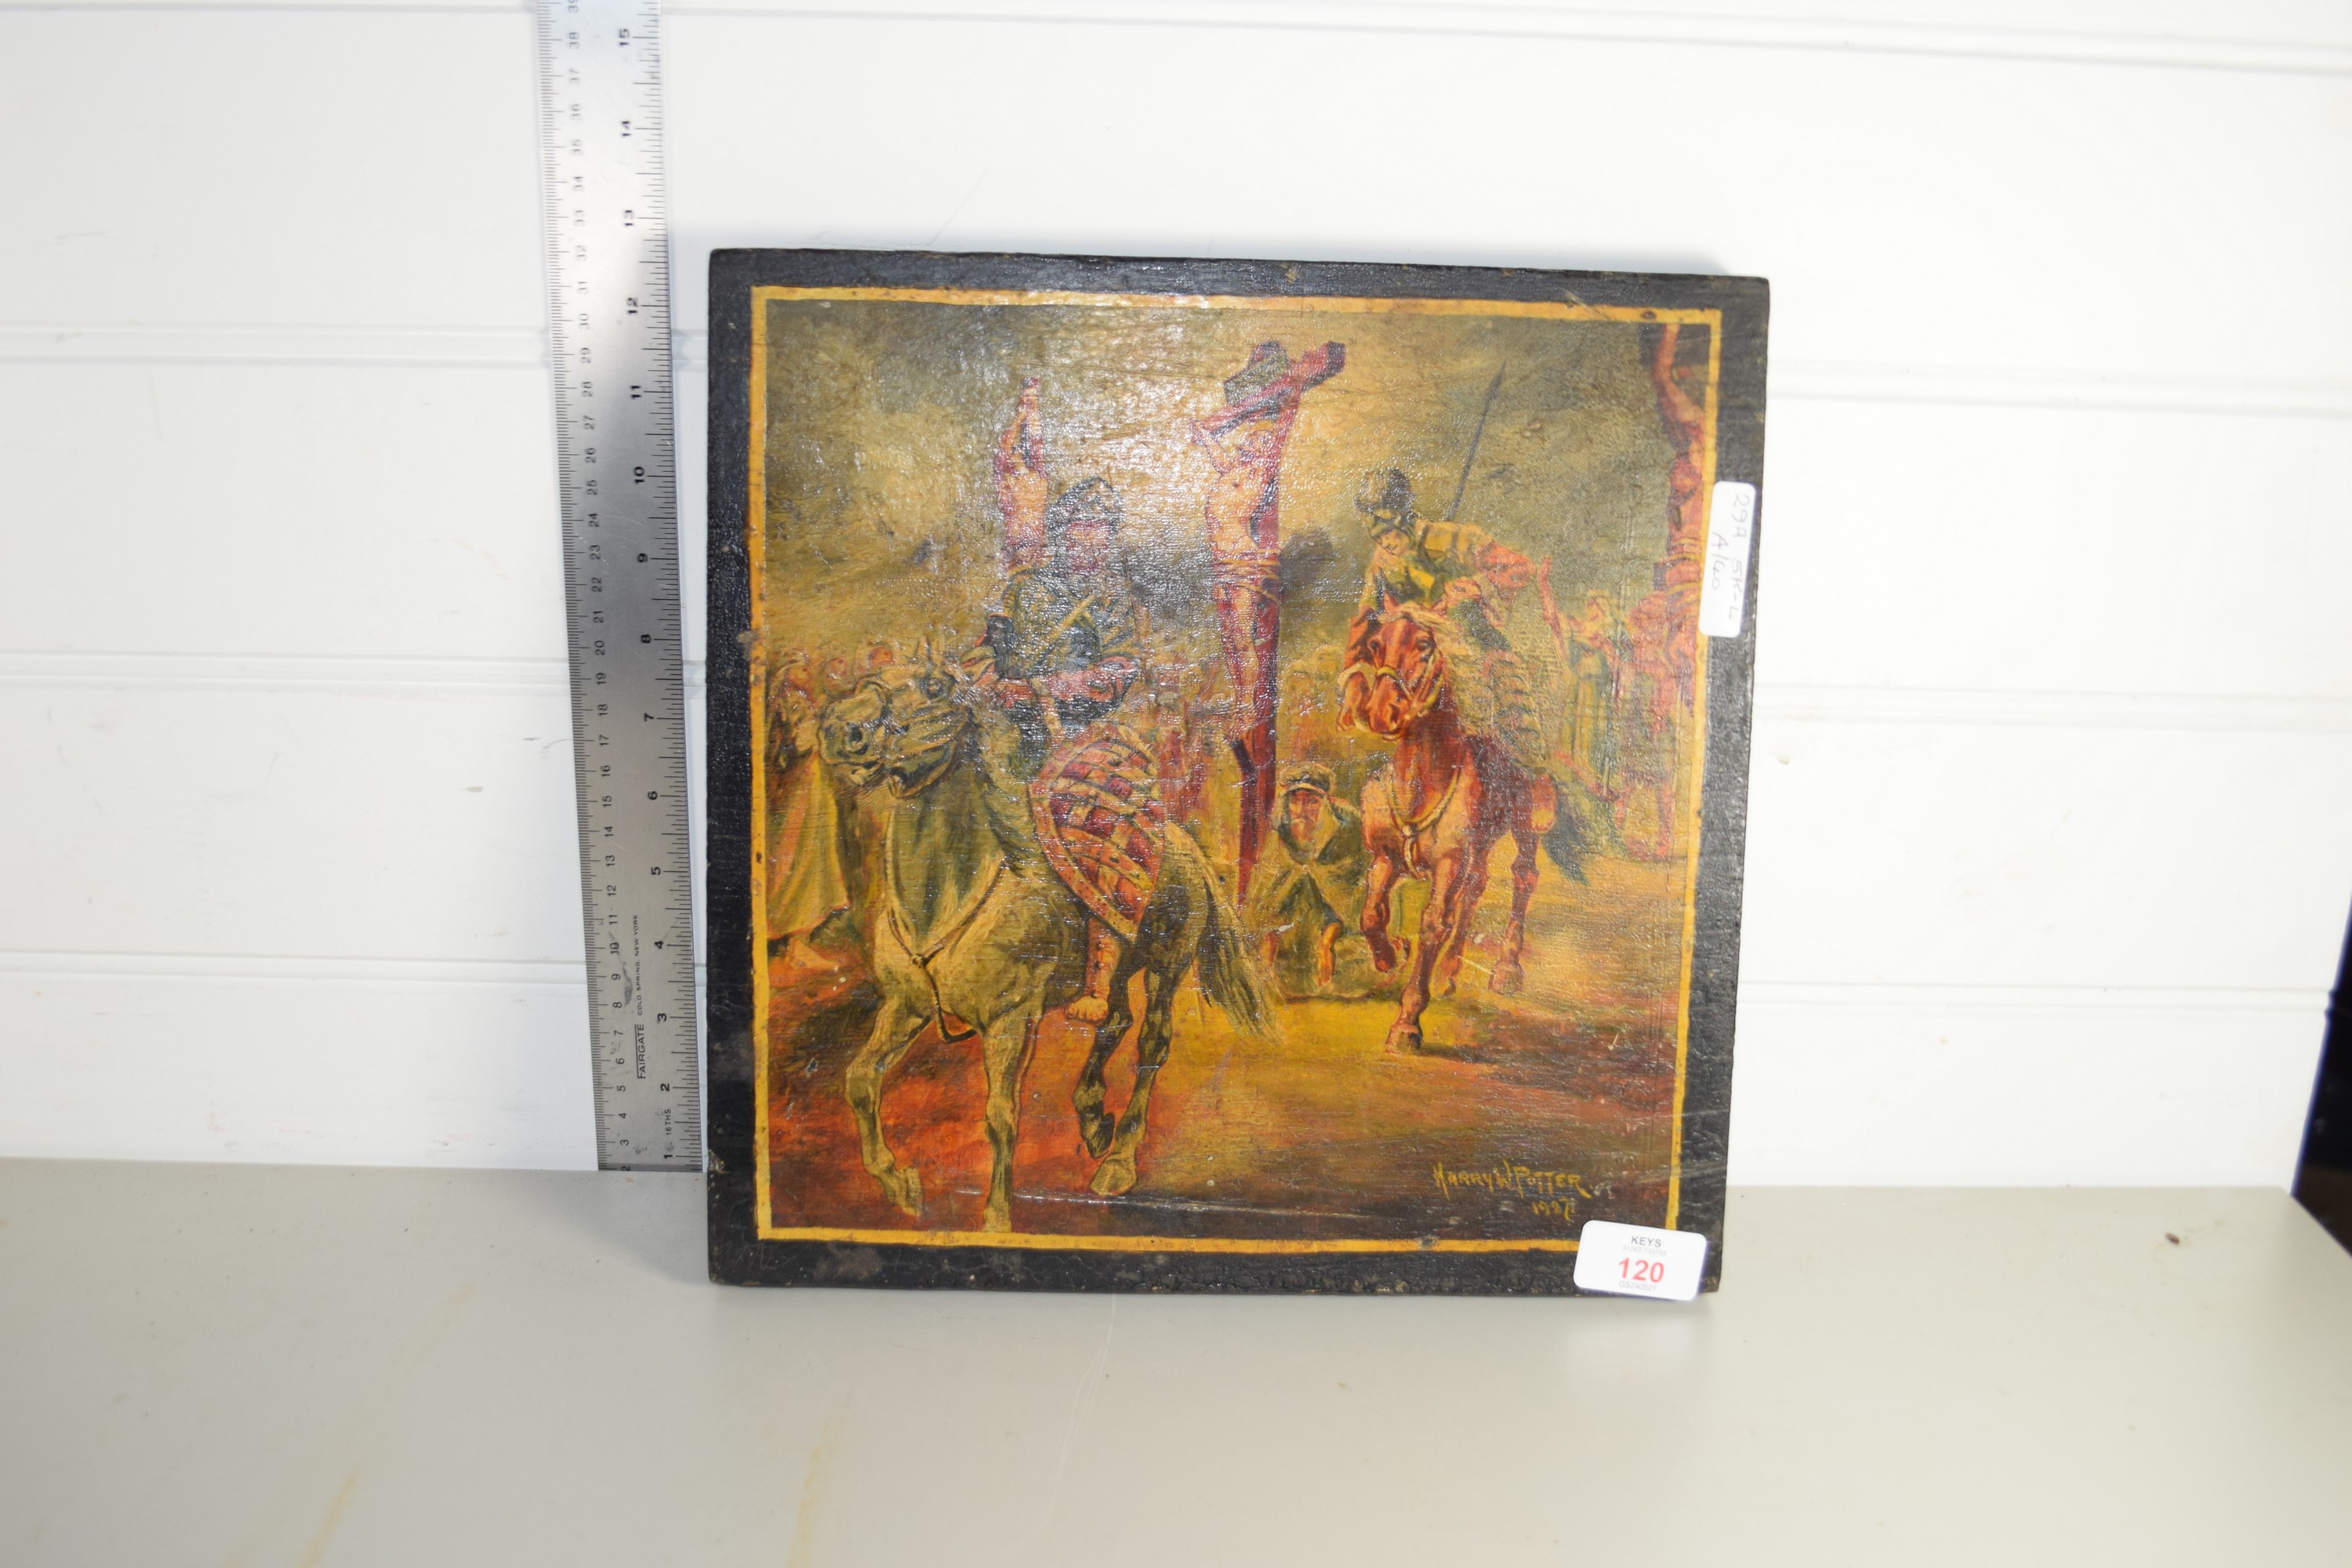 WOODEN BOARD WITH A CRUCIFIX SCENE, SIGNED HARRY POTTER